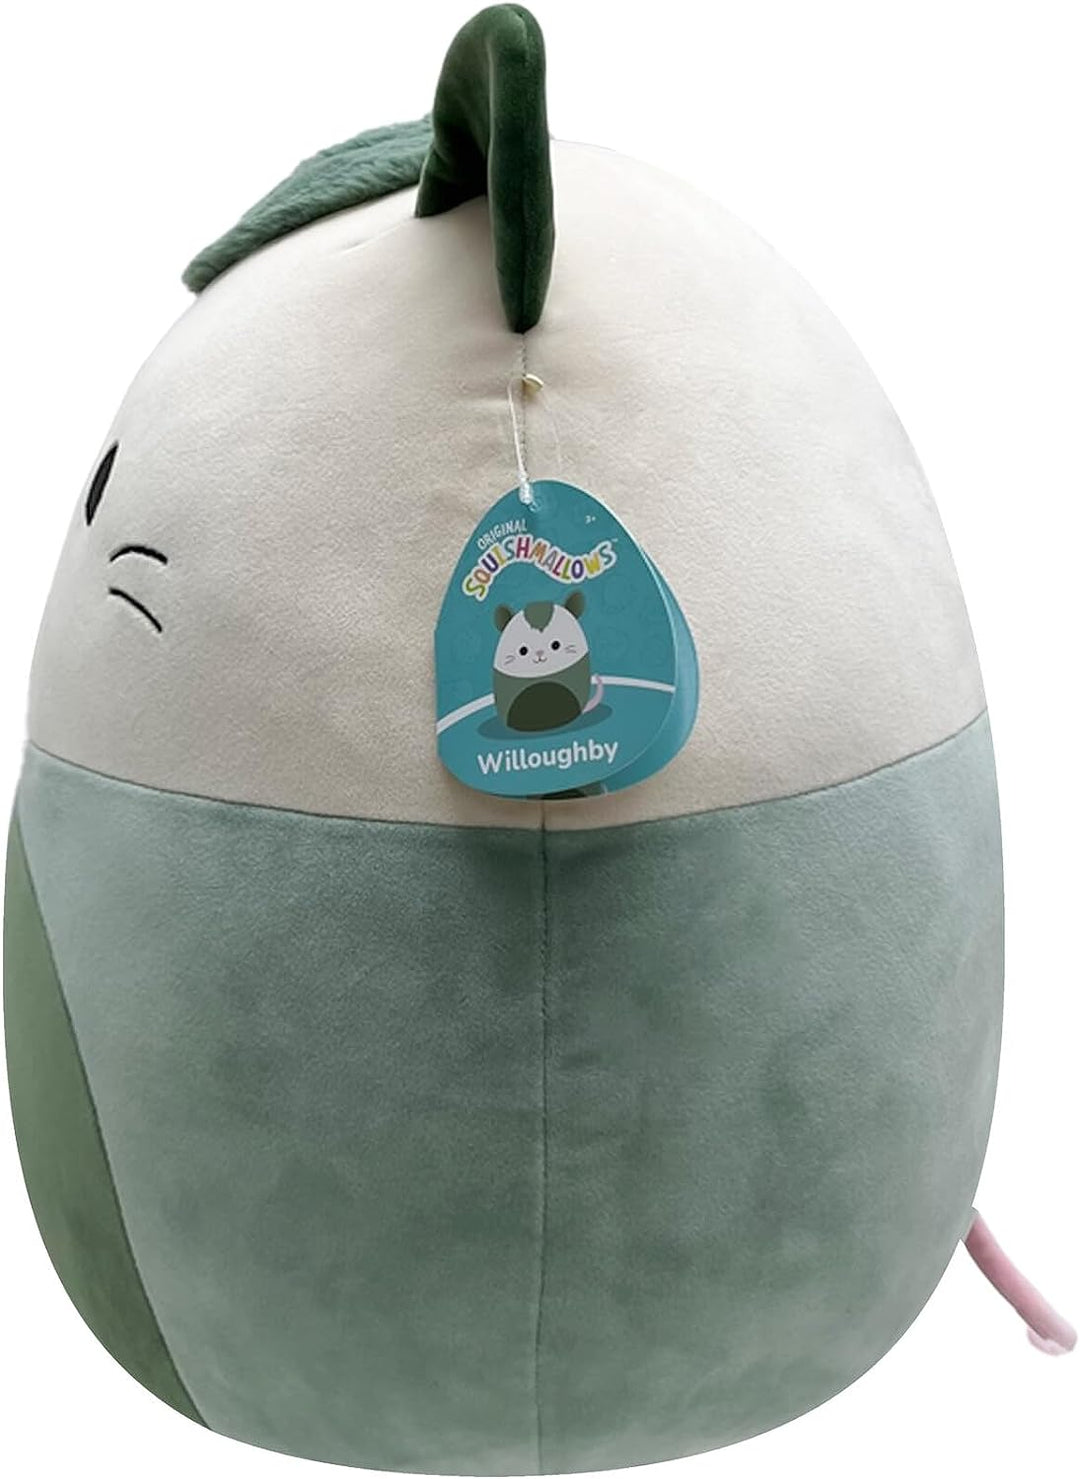 Squishmallows 40cm Willoughby the Green Possum